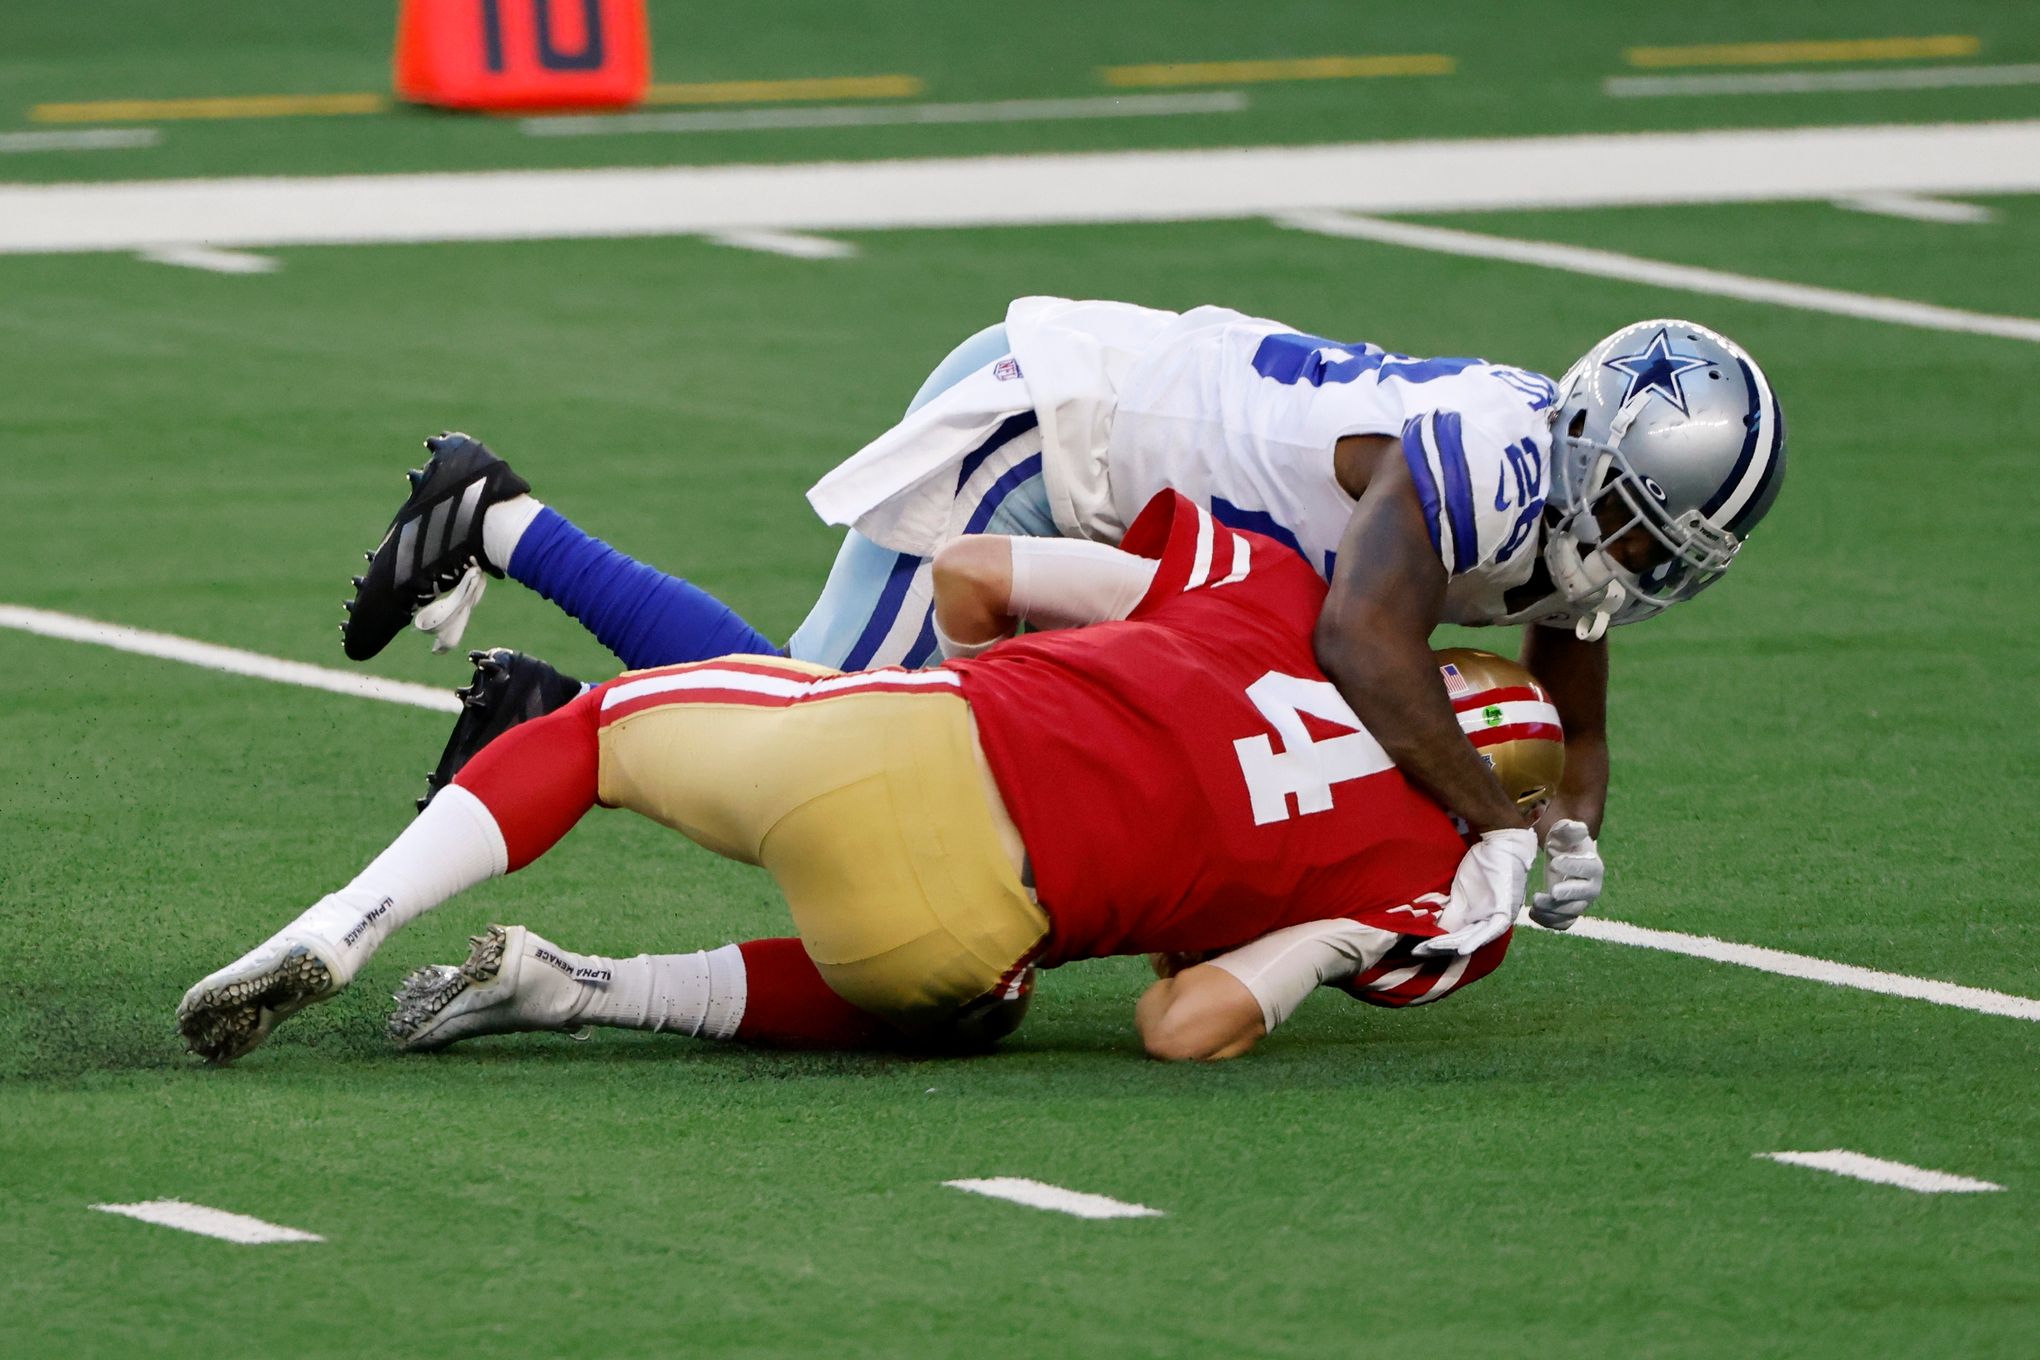 Dallas Cowboys defense becomes thieves as they beat 49ers 41-33